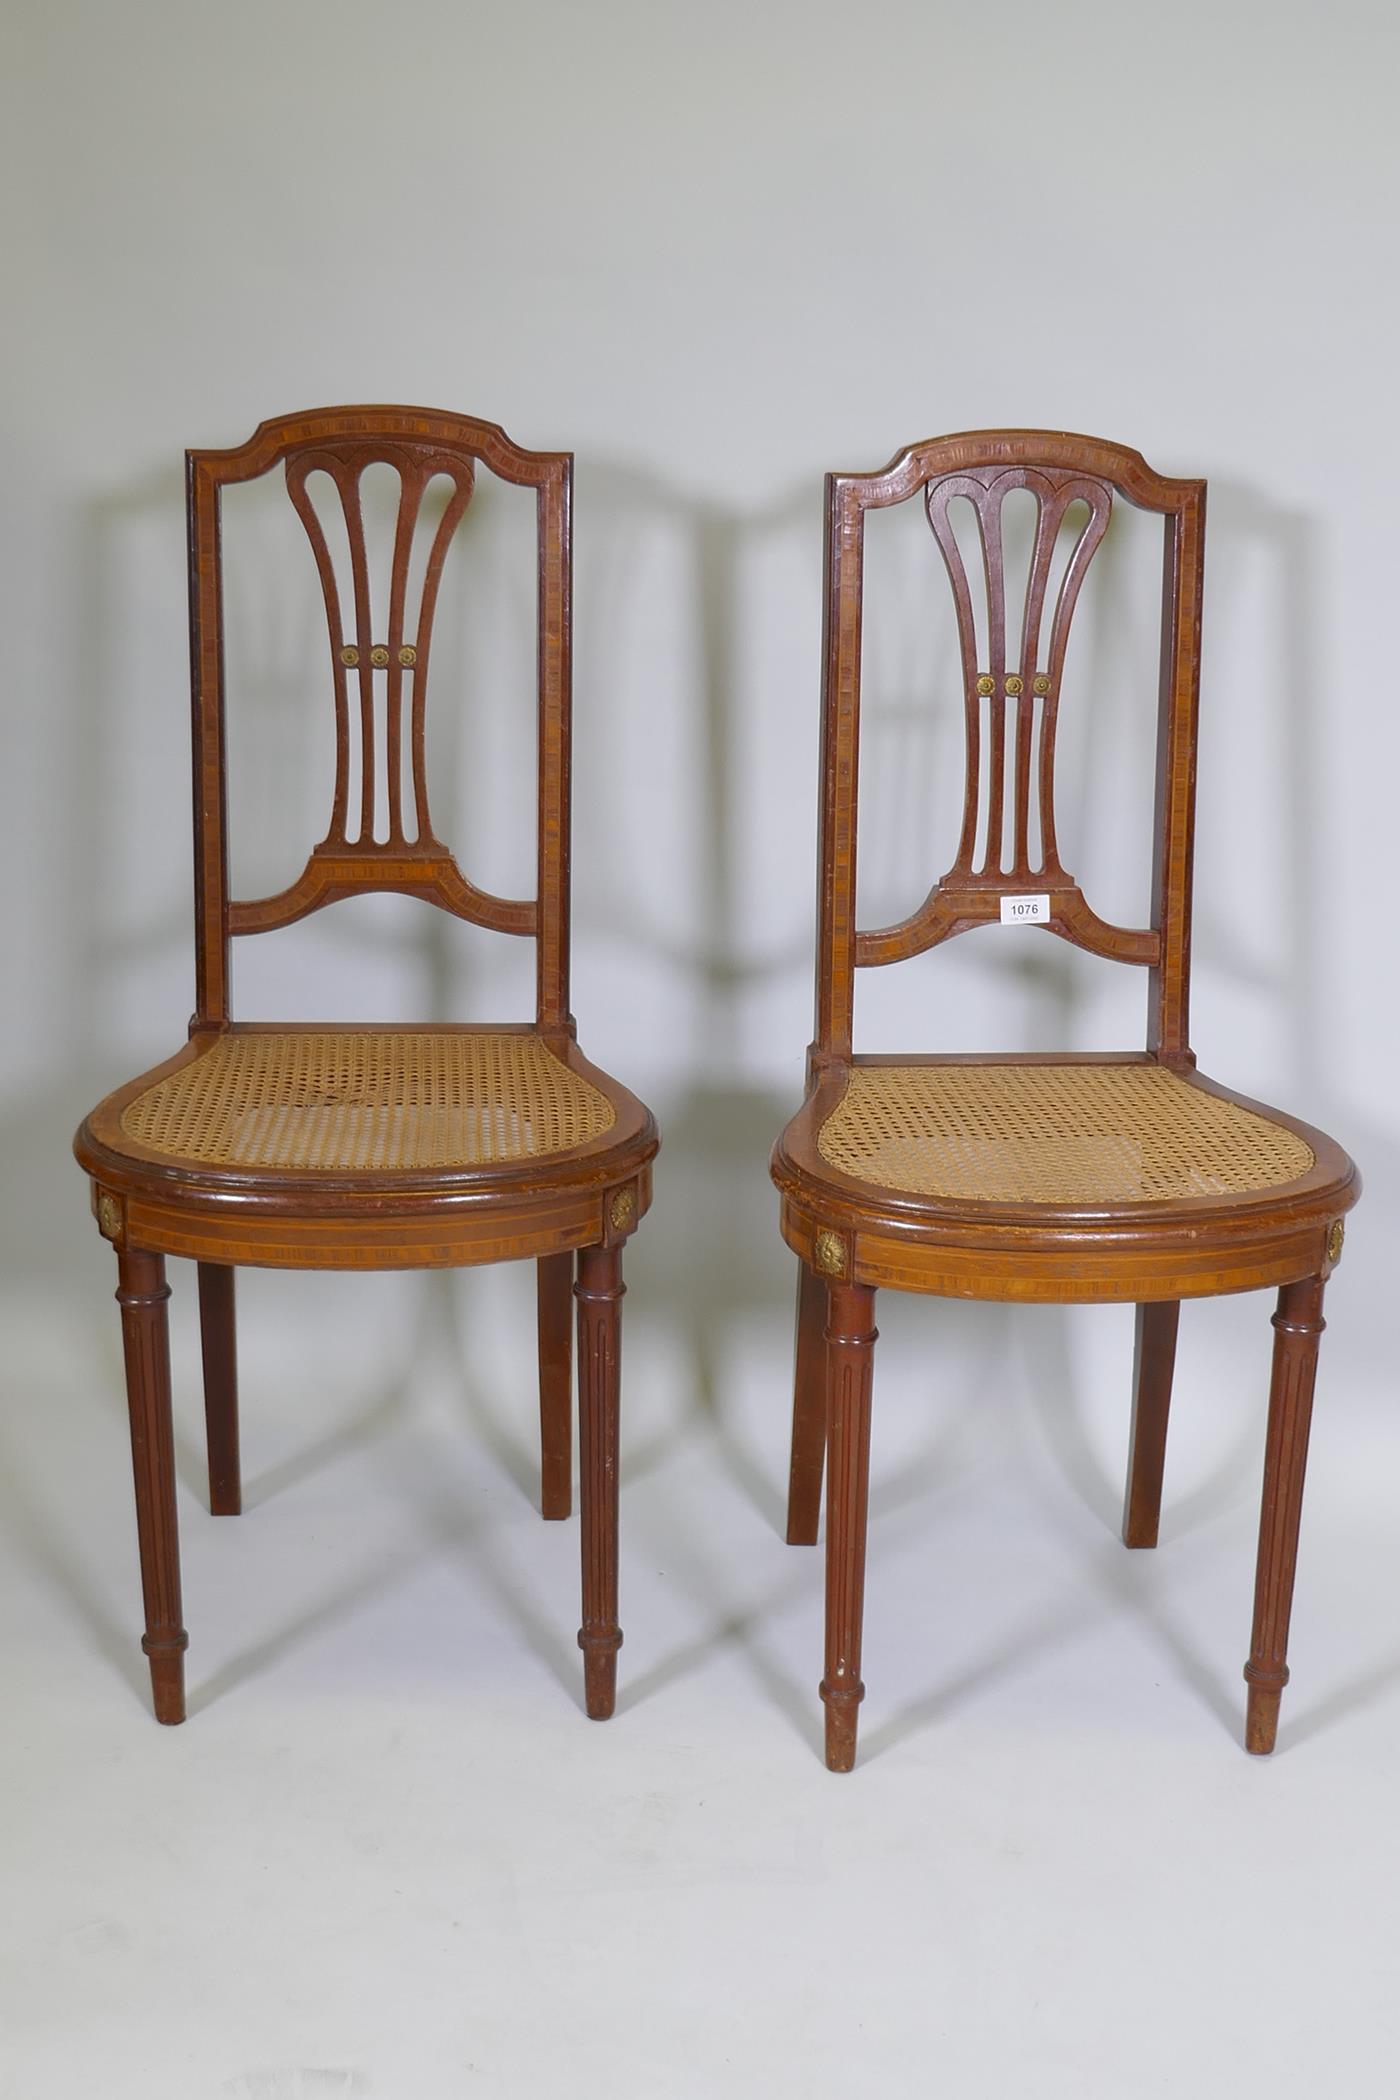 A pair of C19th continental neo-classical style mahogany and satinwood banded side chairs, with - Image 2 of 4